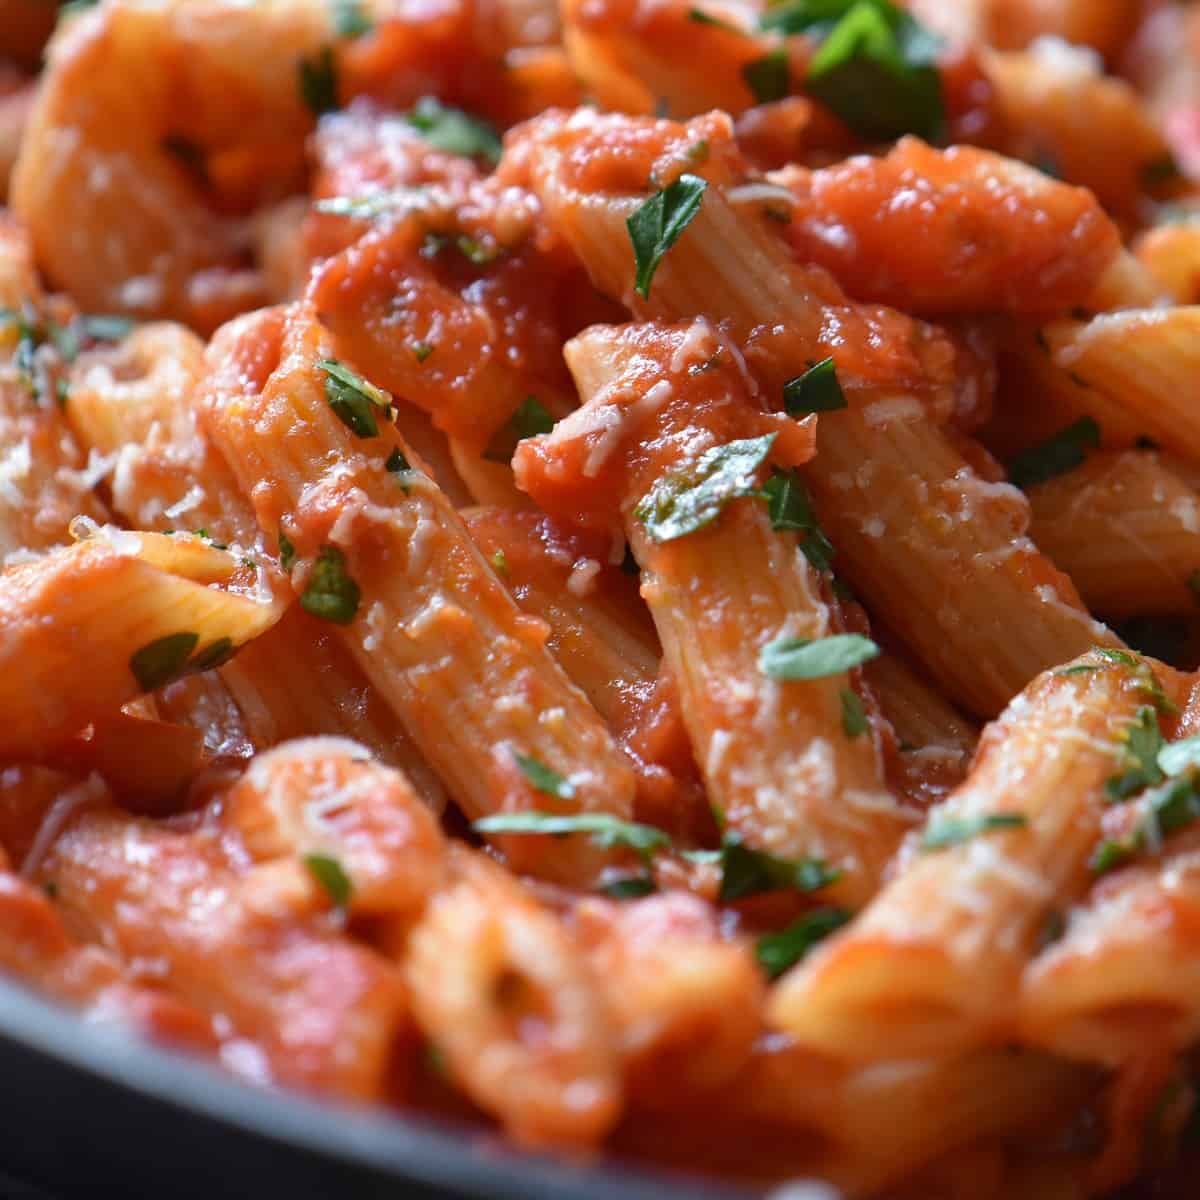 A close up photo of penne pasta with spicy tomato sauce.